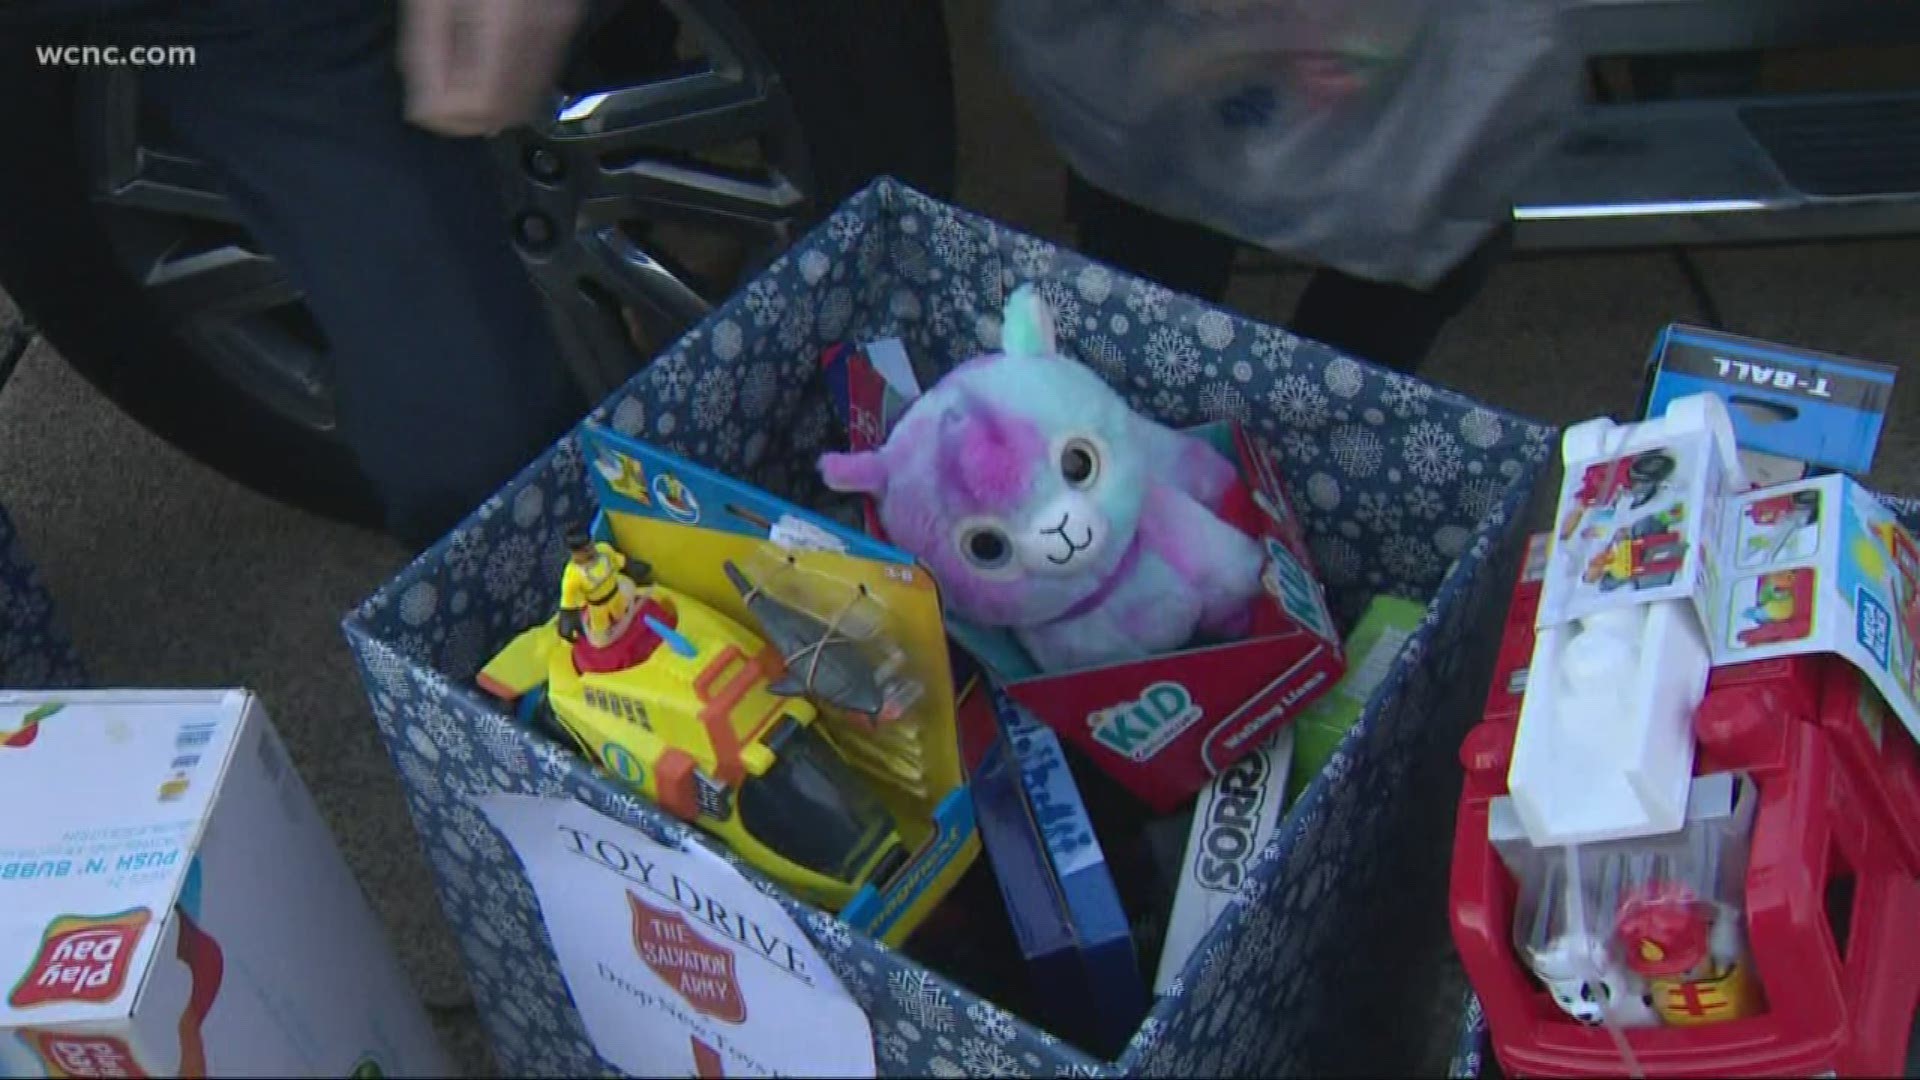 The Charlotte Soccer Academy made a huge donation to the Magical Toy Drive, dropping off hundreds of dollars' worth of toys at WCNC Wednesday.